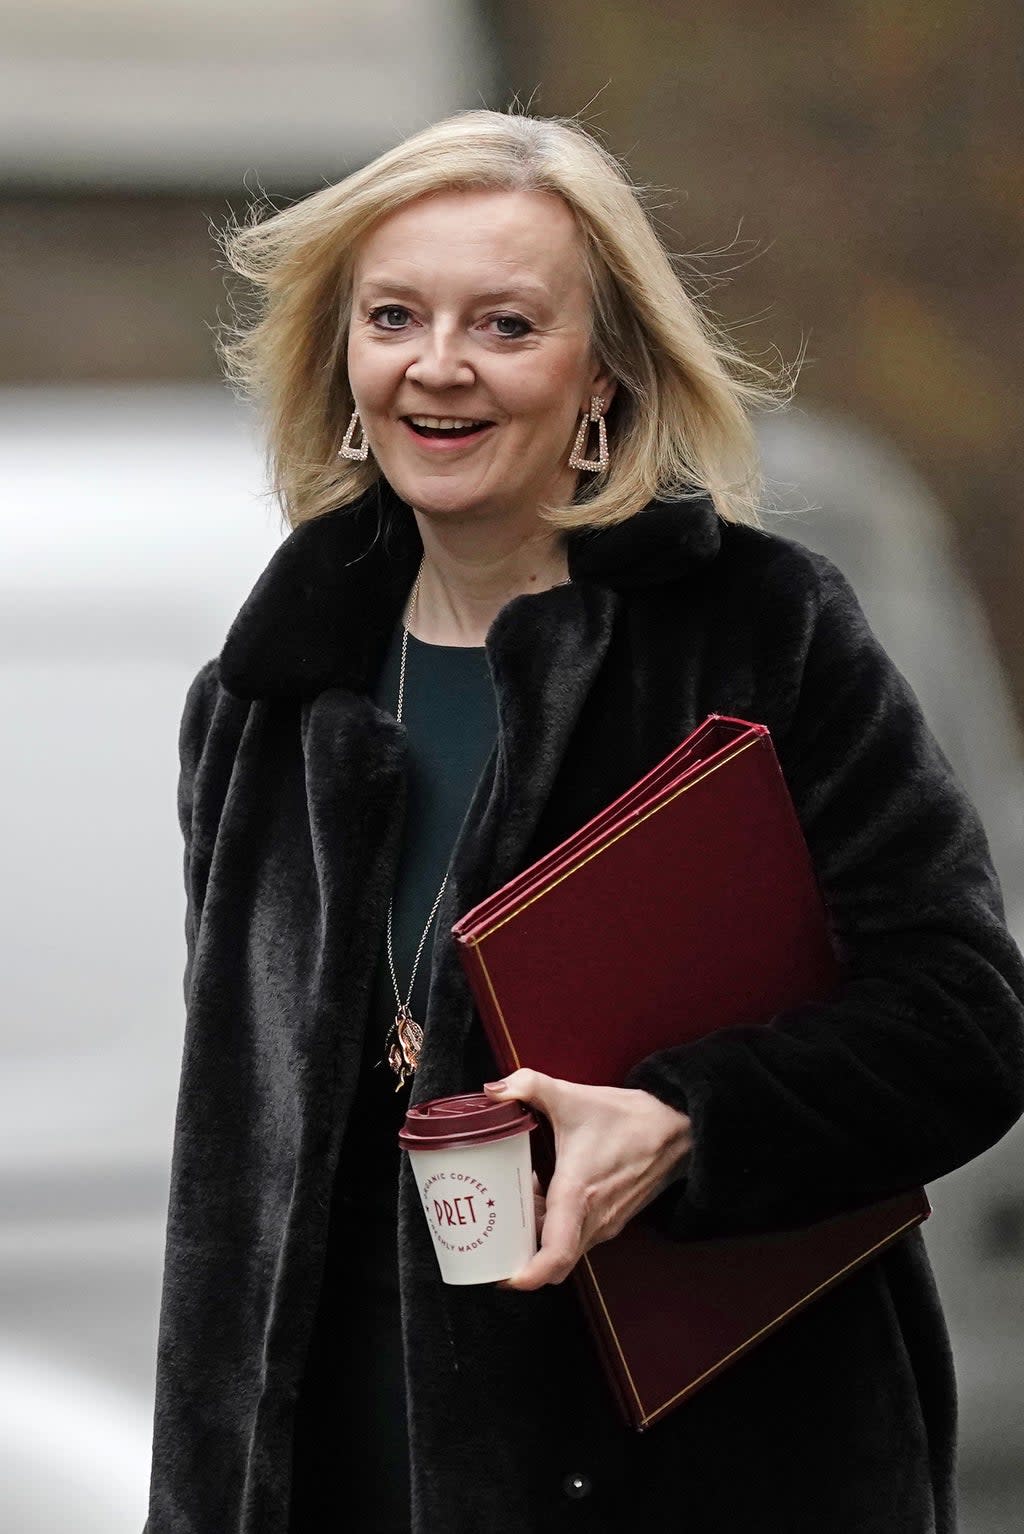 Foreign Secretary Liz Truss has said she is ‘willing’ to invoke Article 16 if agreement is not reached in post-Brexit talks between the UK and the EU (Aaron Chown/PA) (PA Wire)